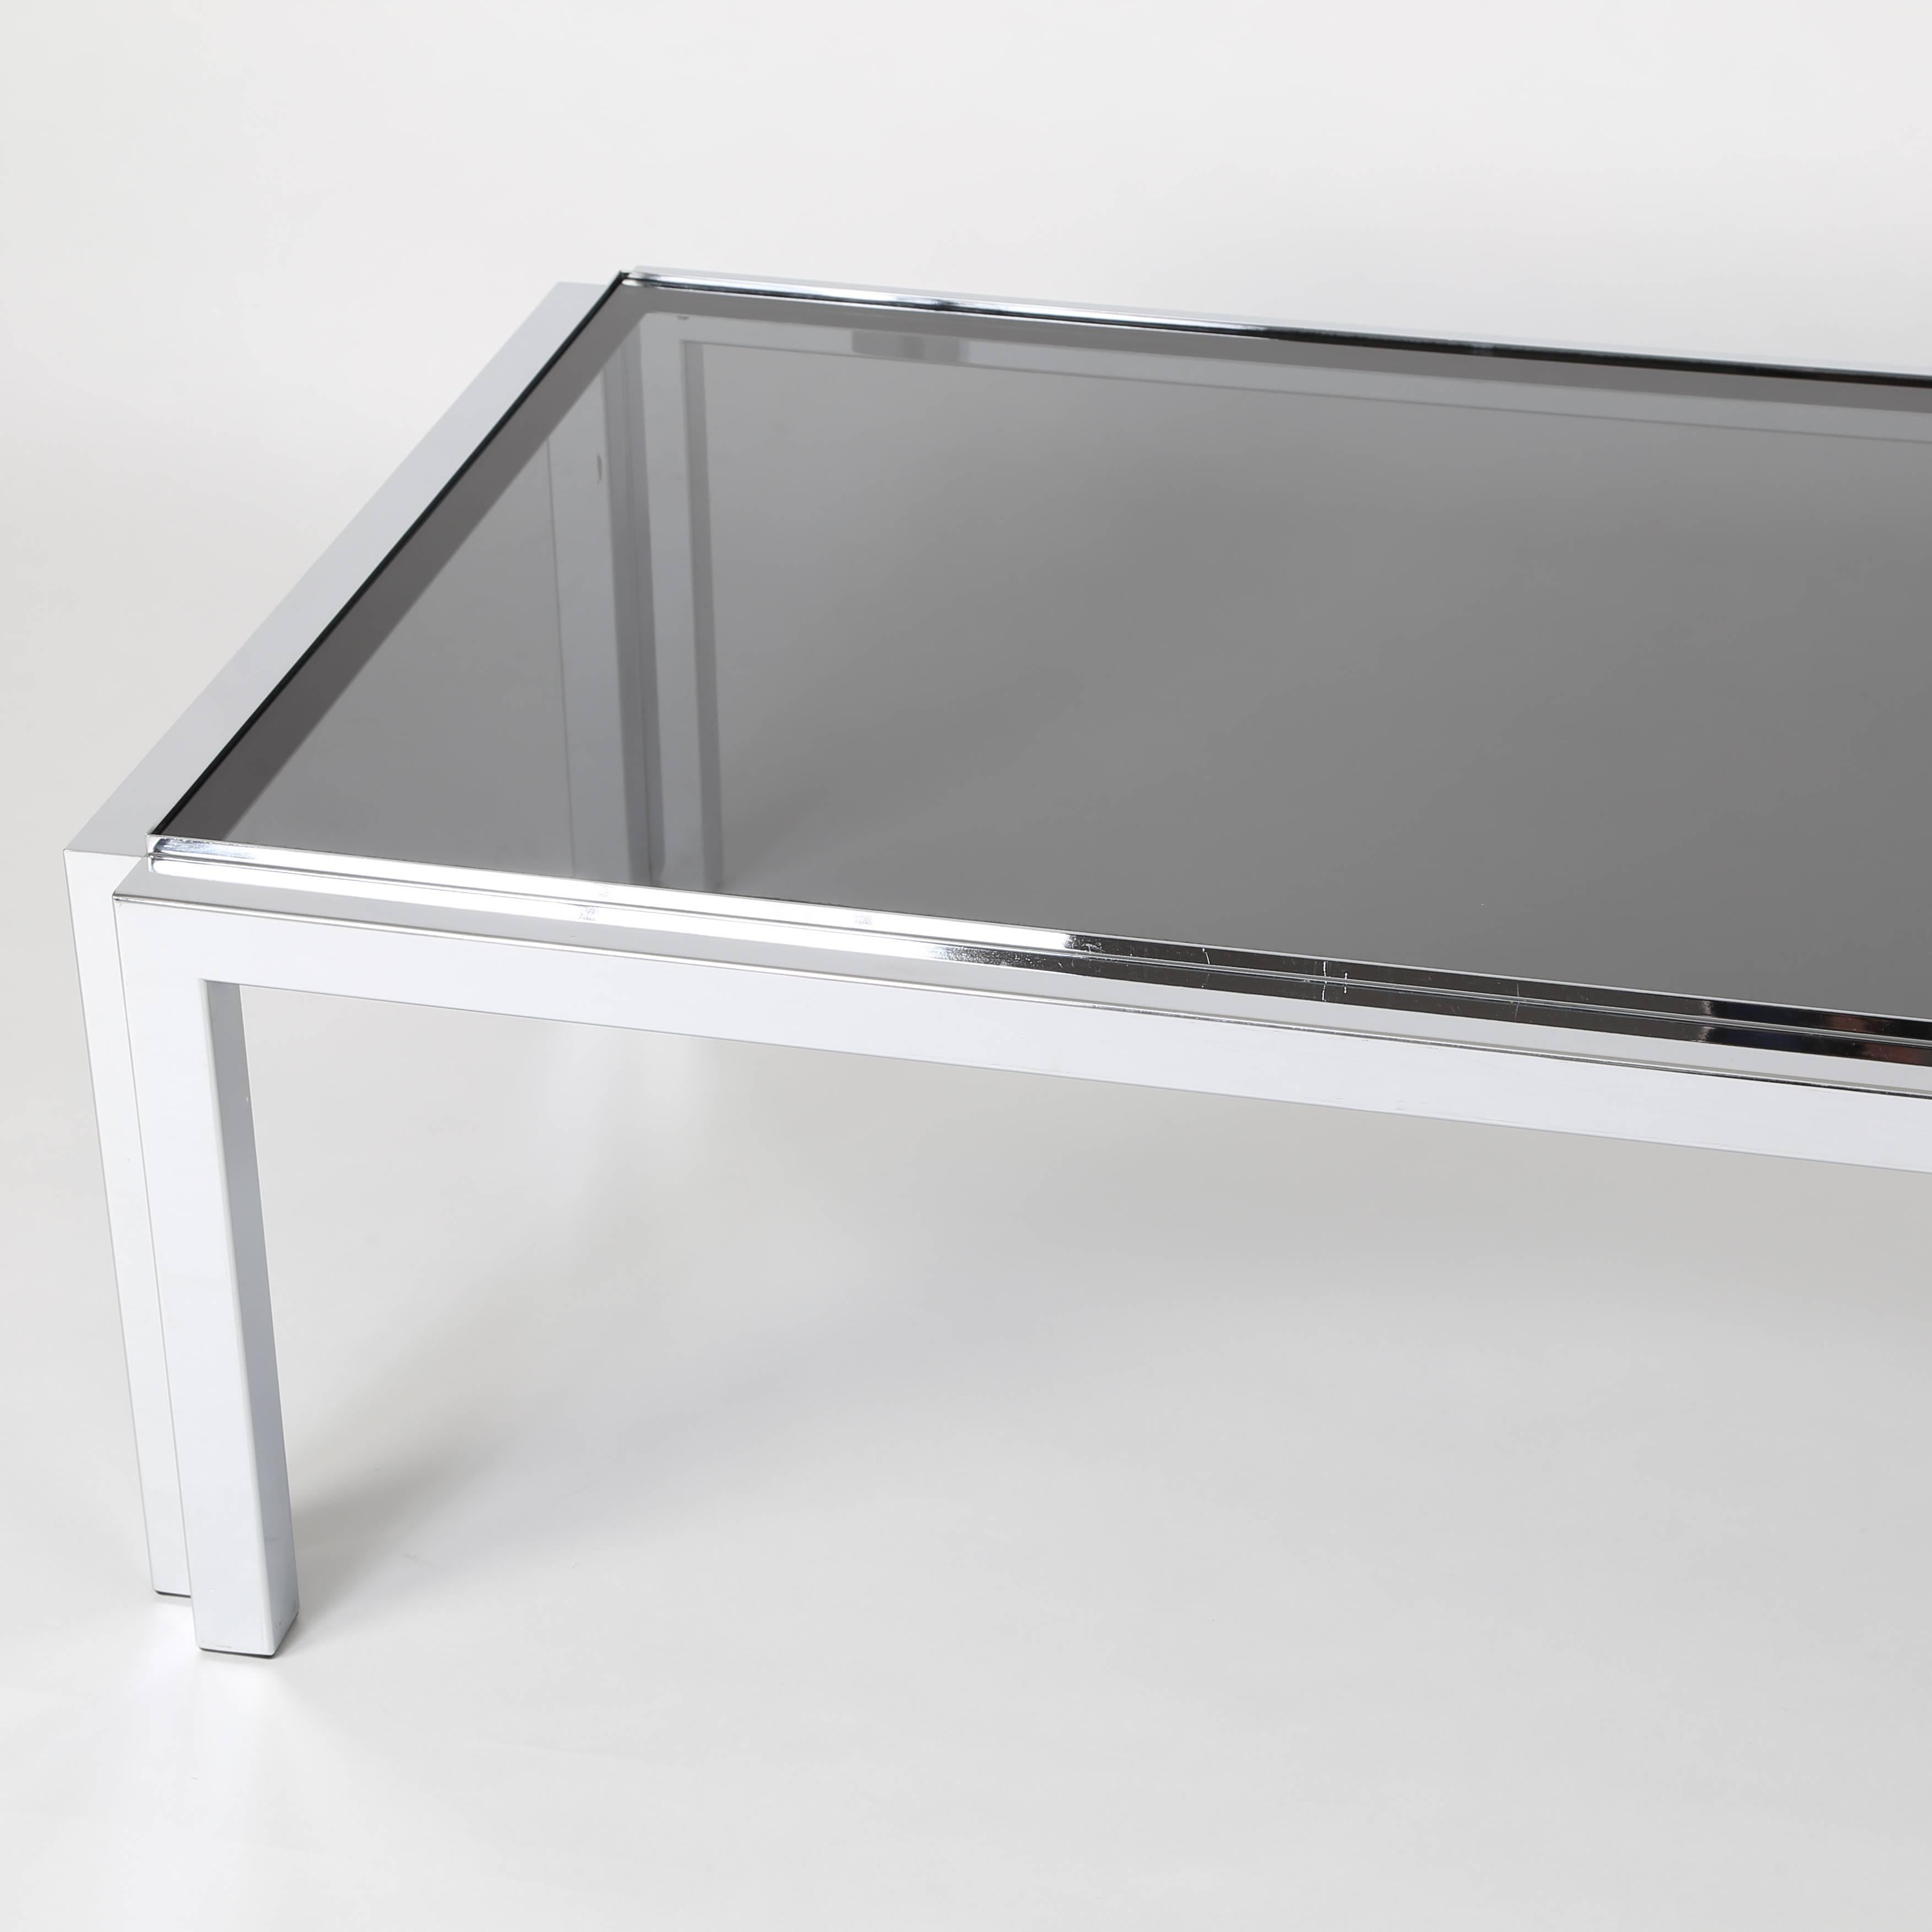 Rectangular Chrome and Smoked-Glass Coffee Table, circa 1970s In Excellent Condition For Sale In Brooklyn, NY